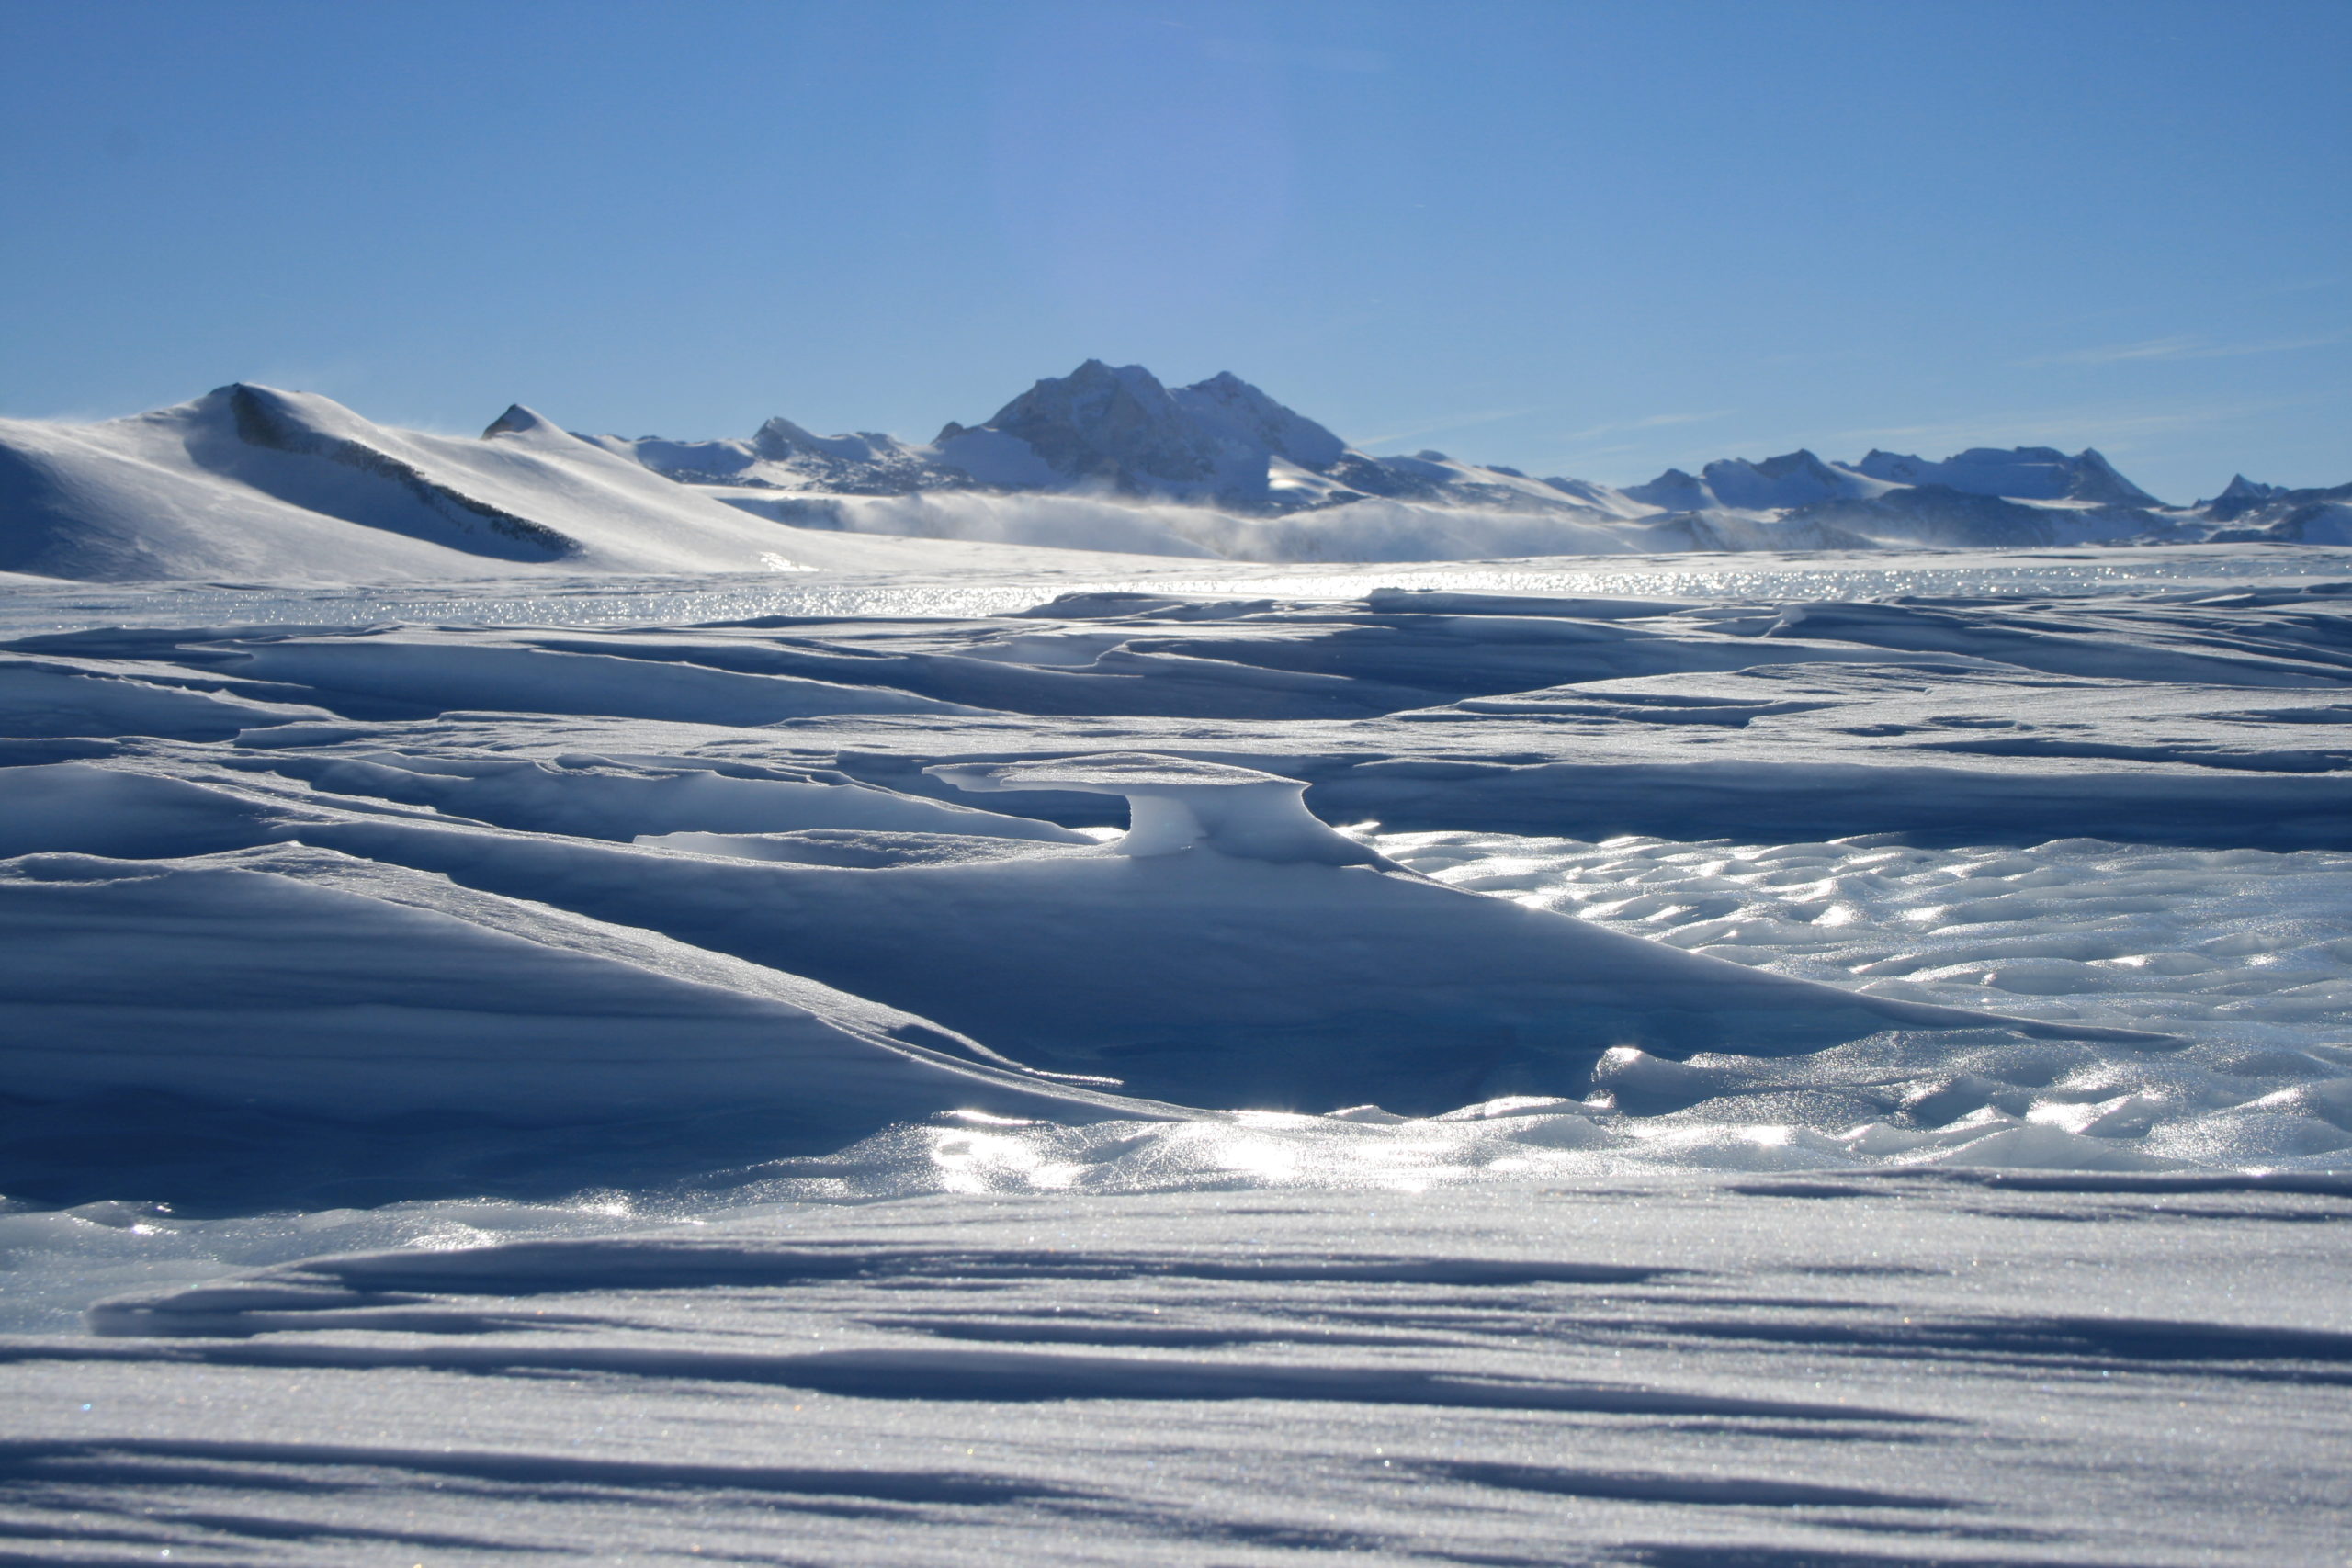 Antarctic Ice Is Hiding A Super-Trench